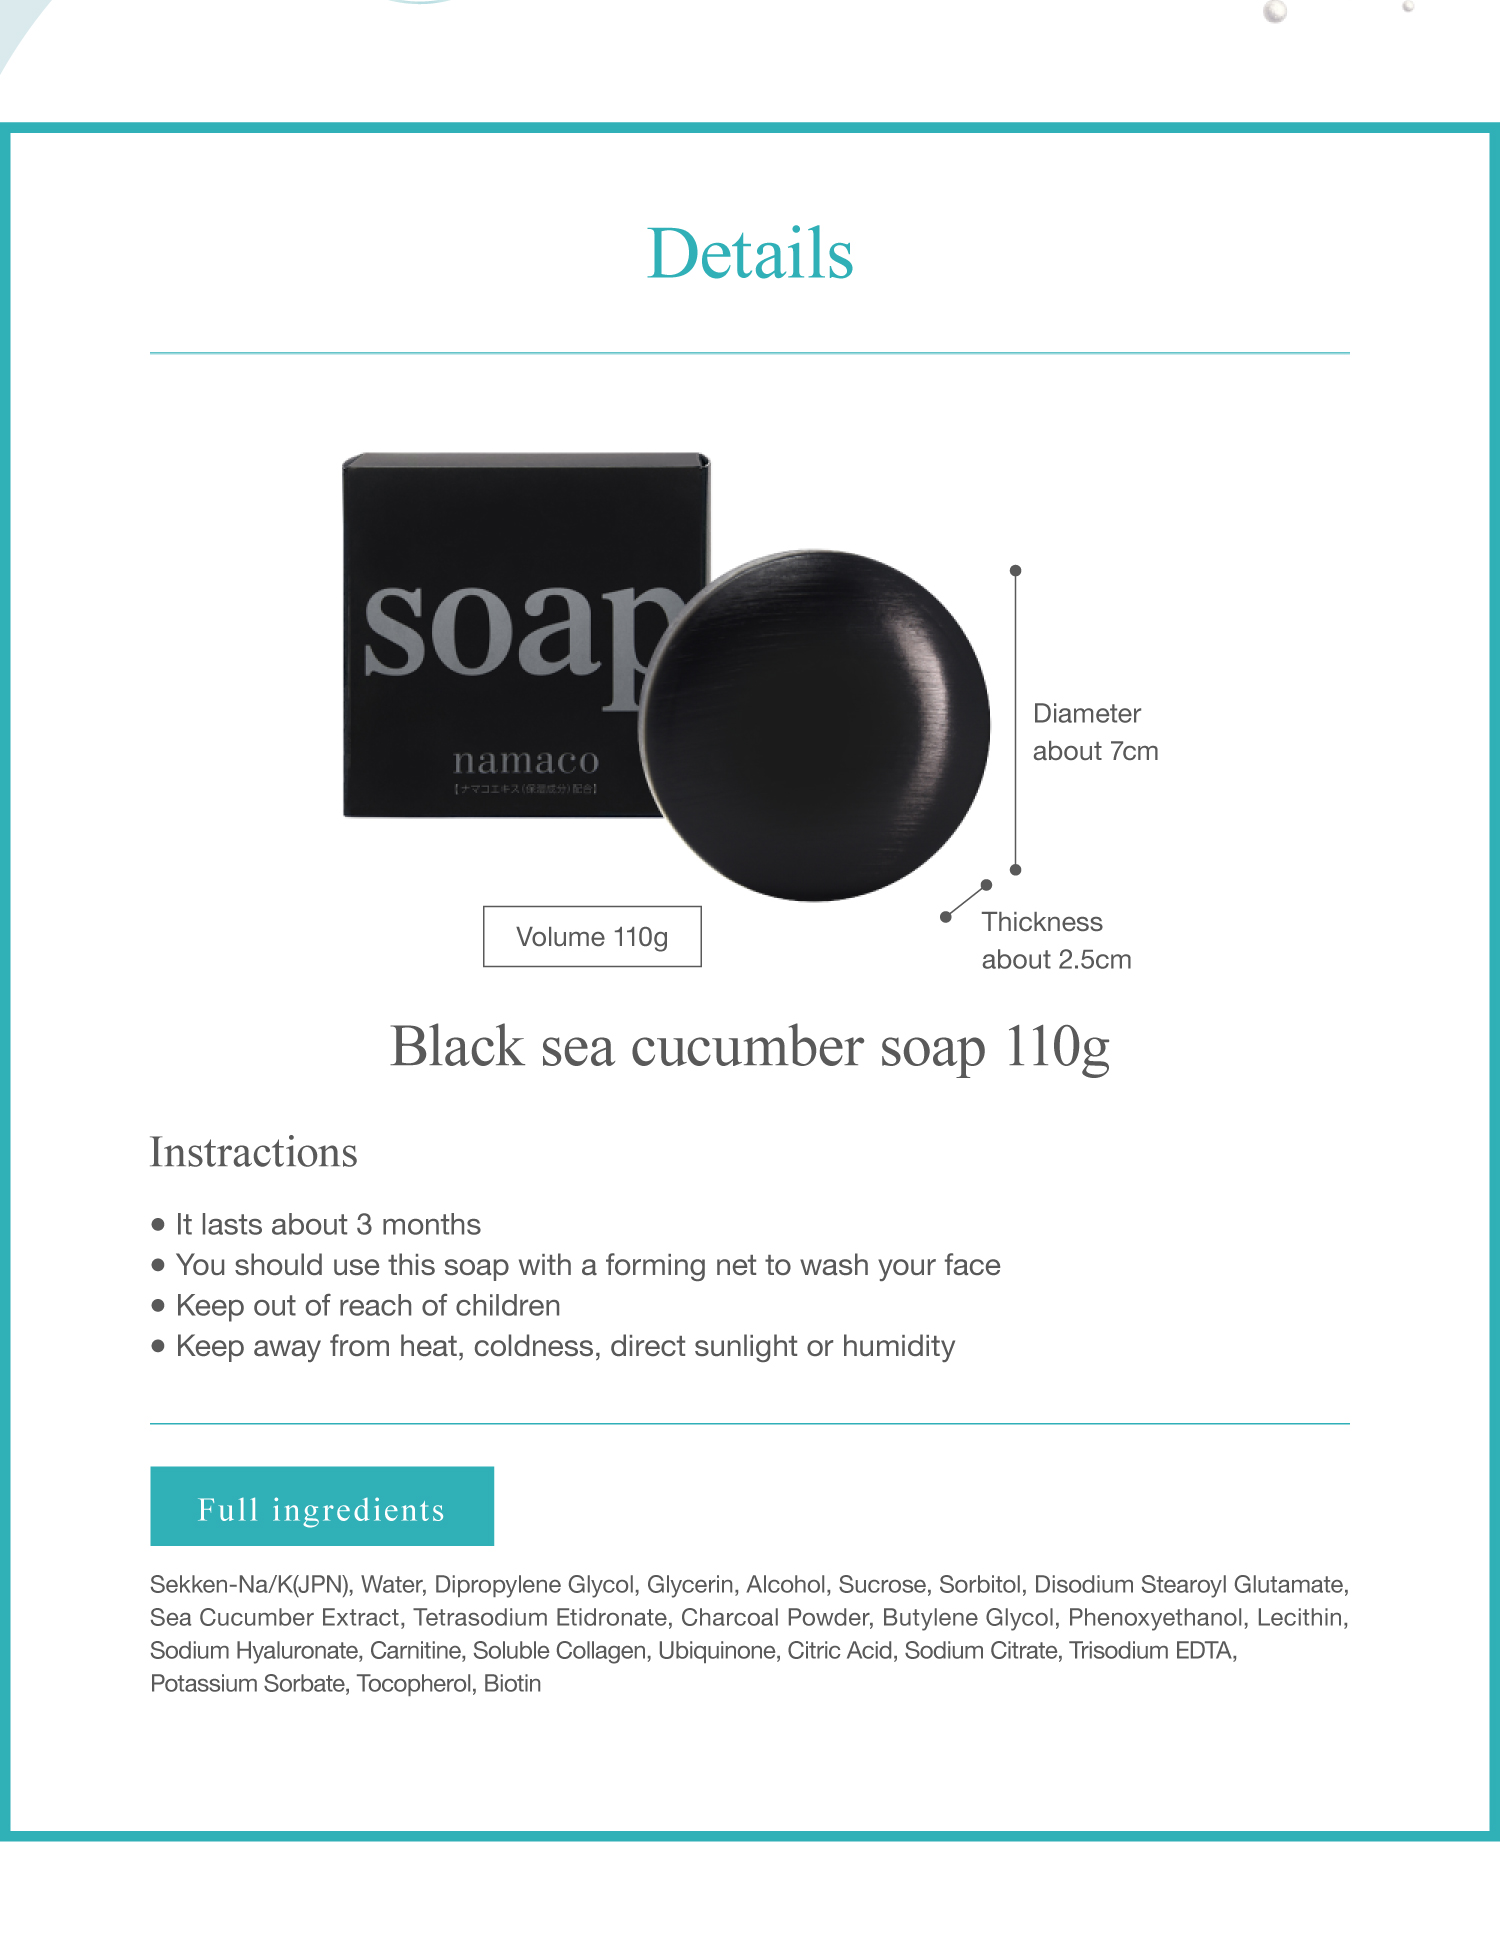 The dimensions of the black sea cucumber soap 110g are Diameter about 7cm, Thickness about 2.5cm